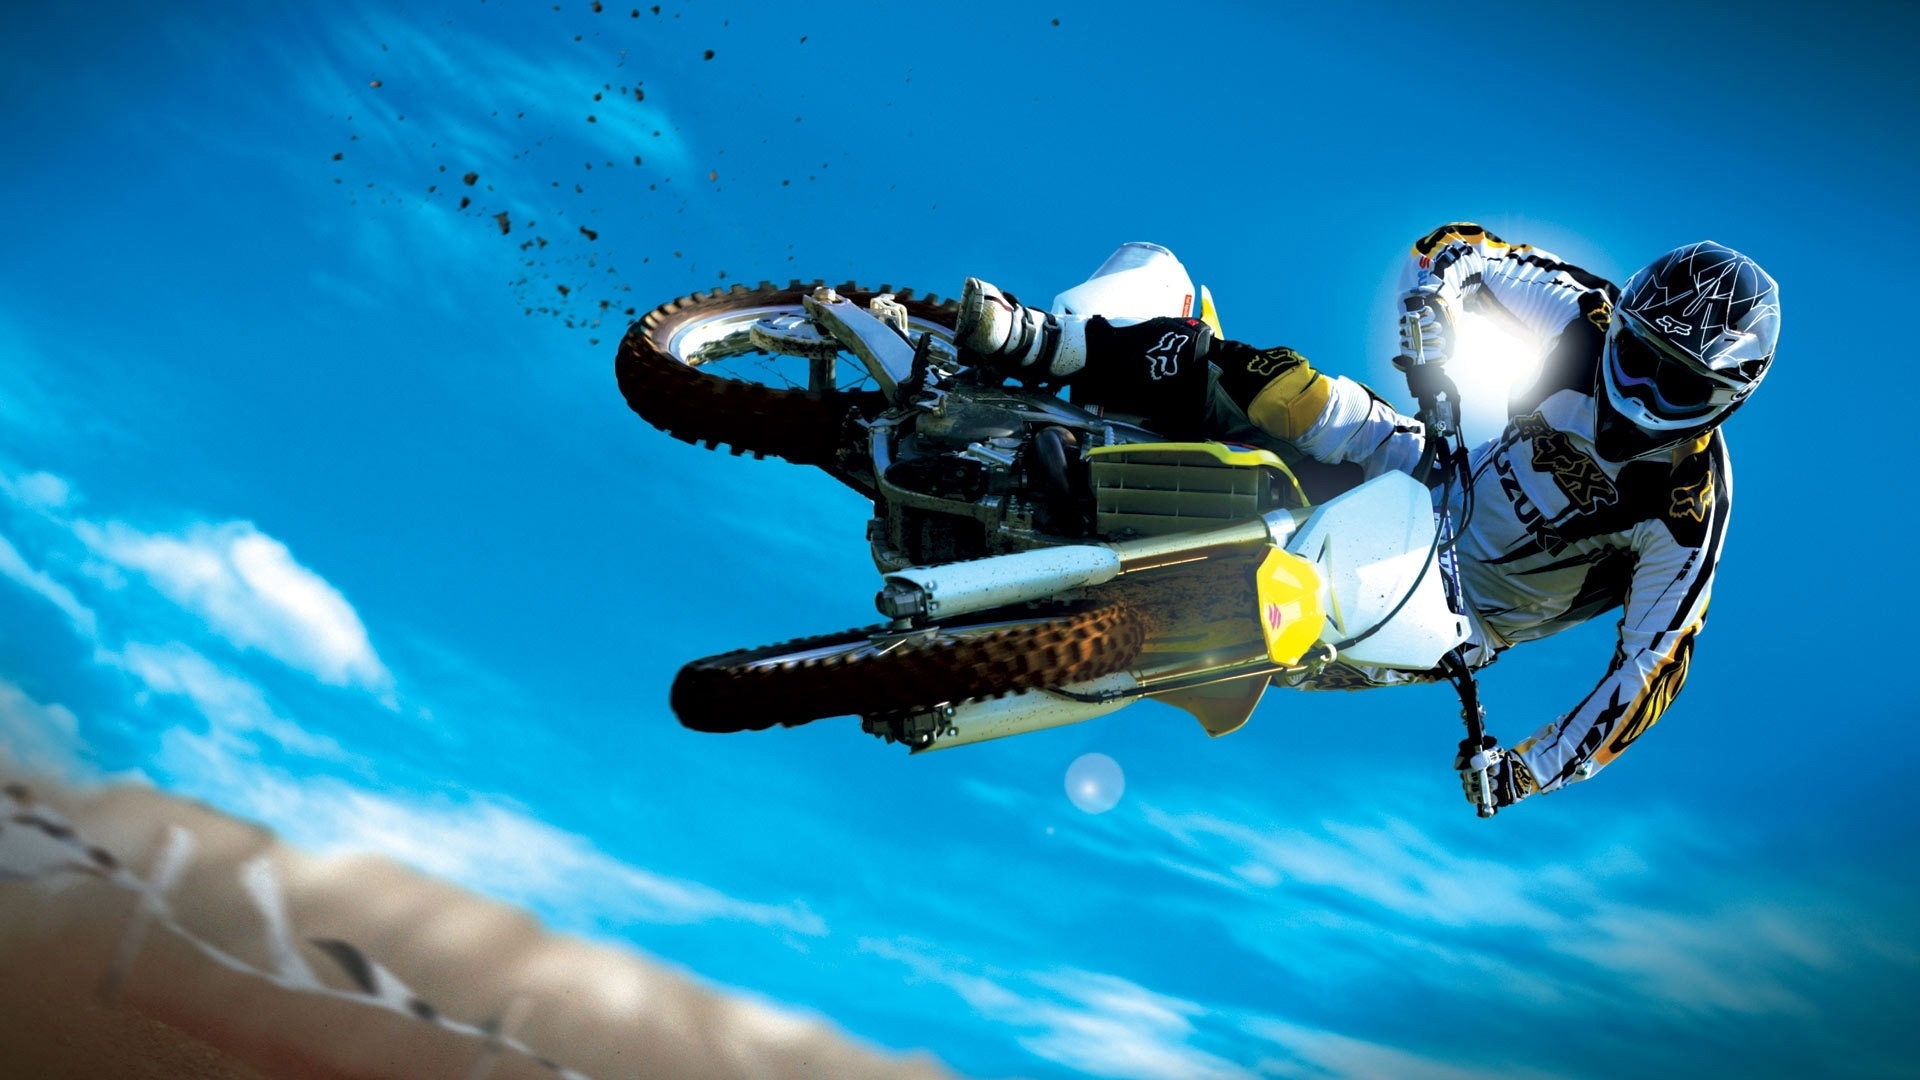 Moto Extreme Sport for 1920 x 1080 HDTV 1080p resolution